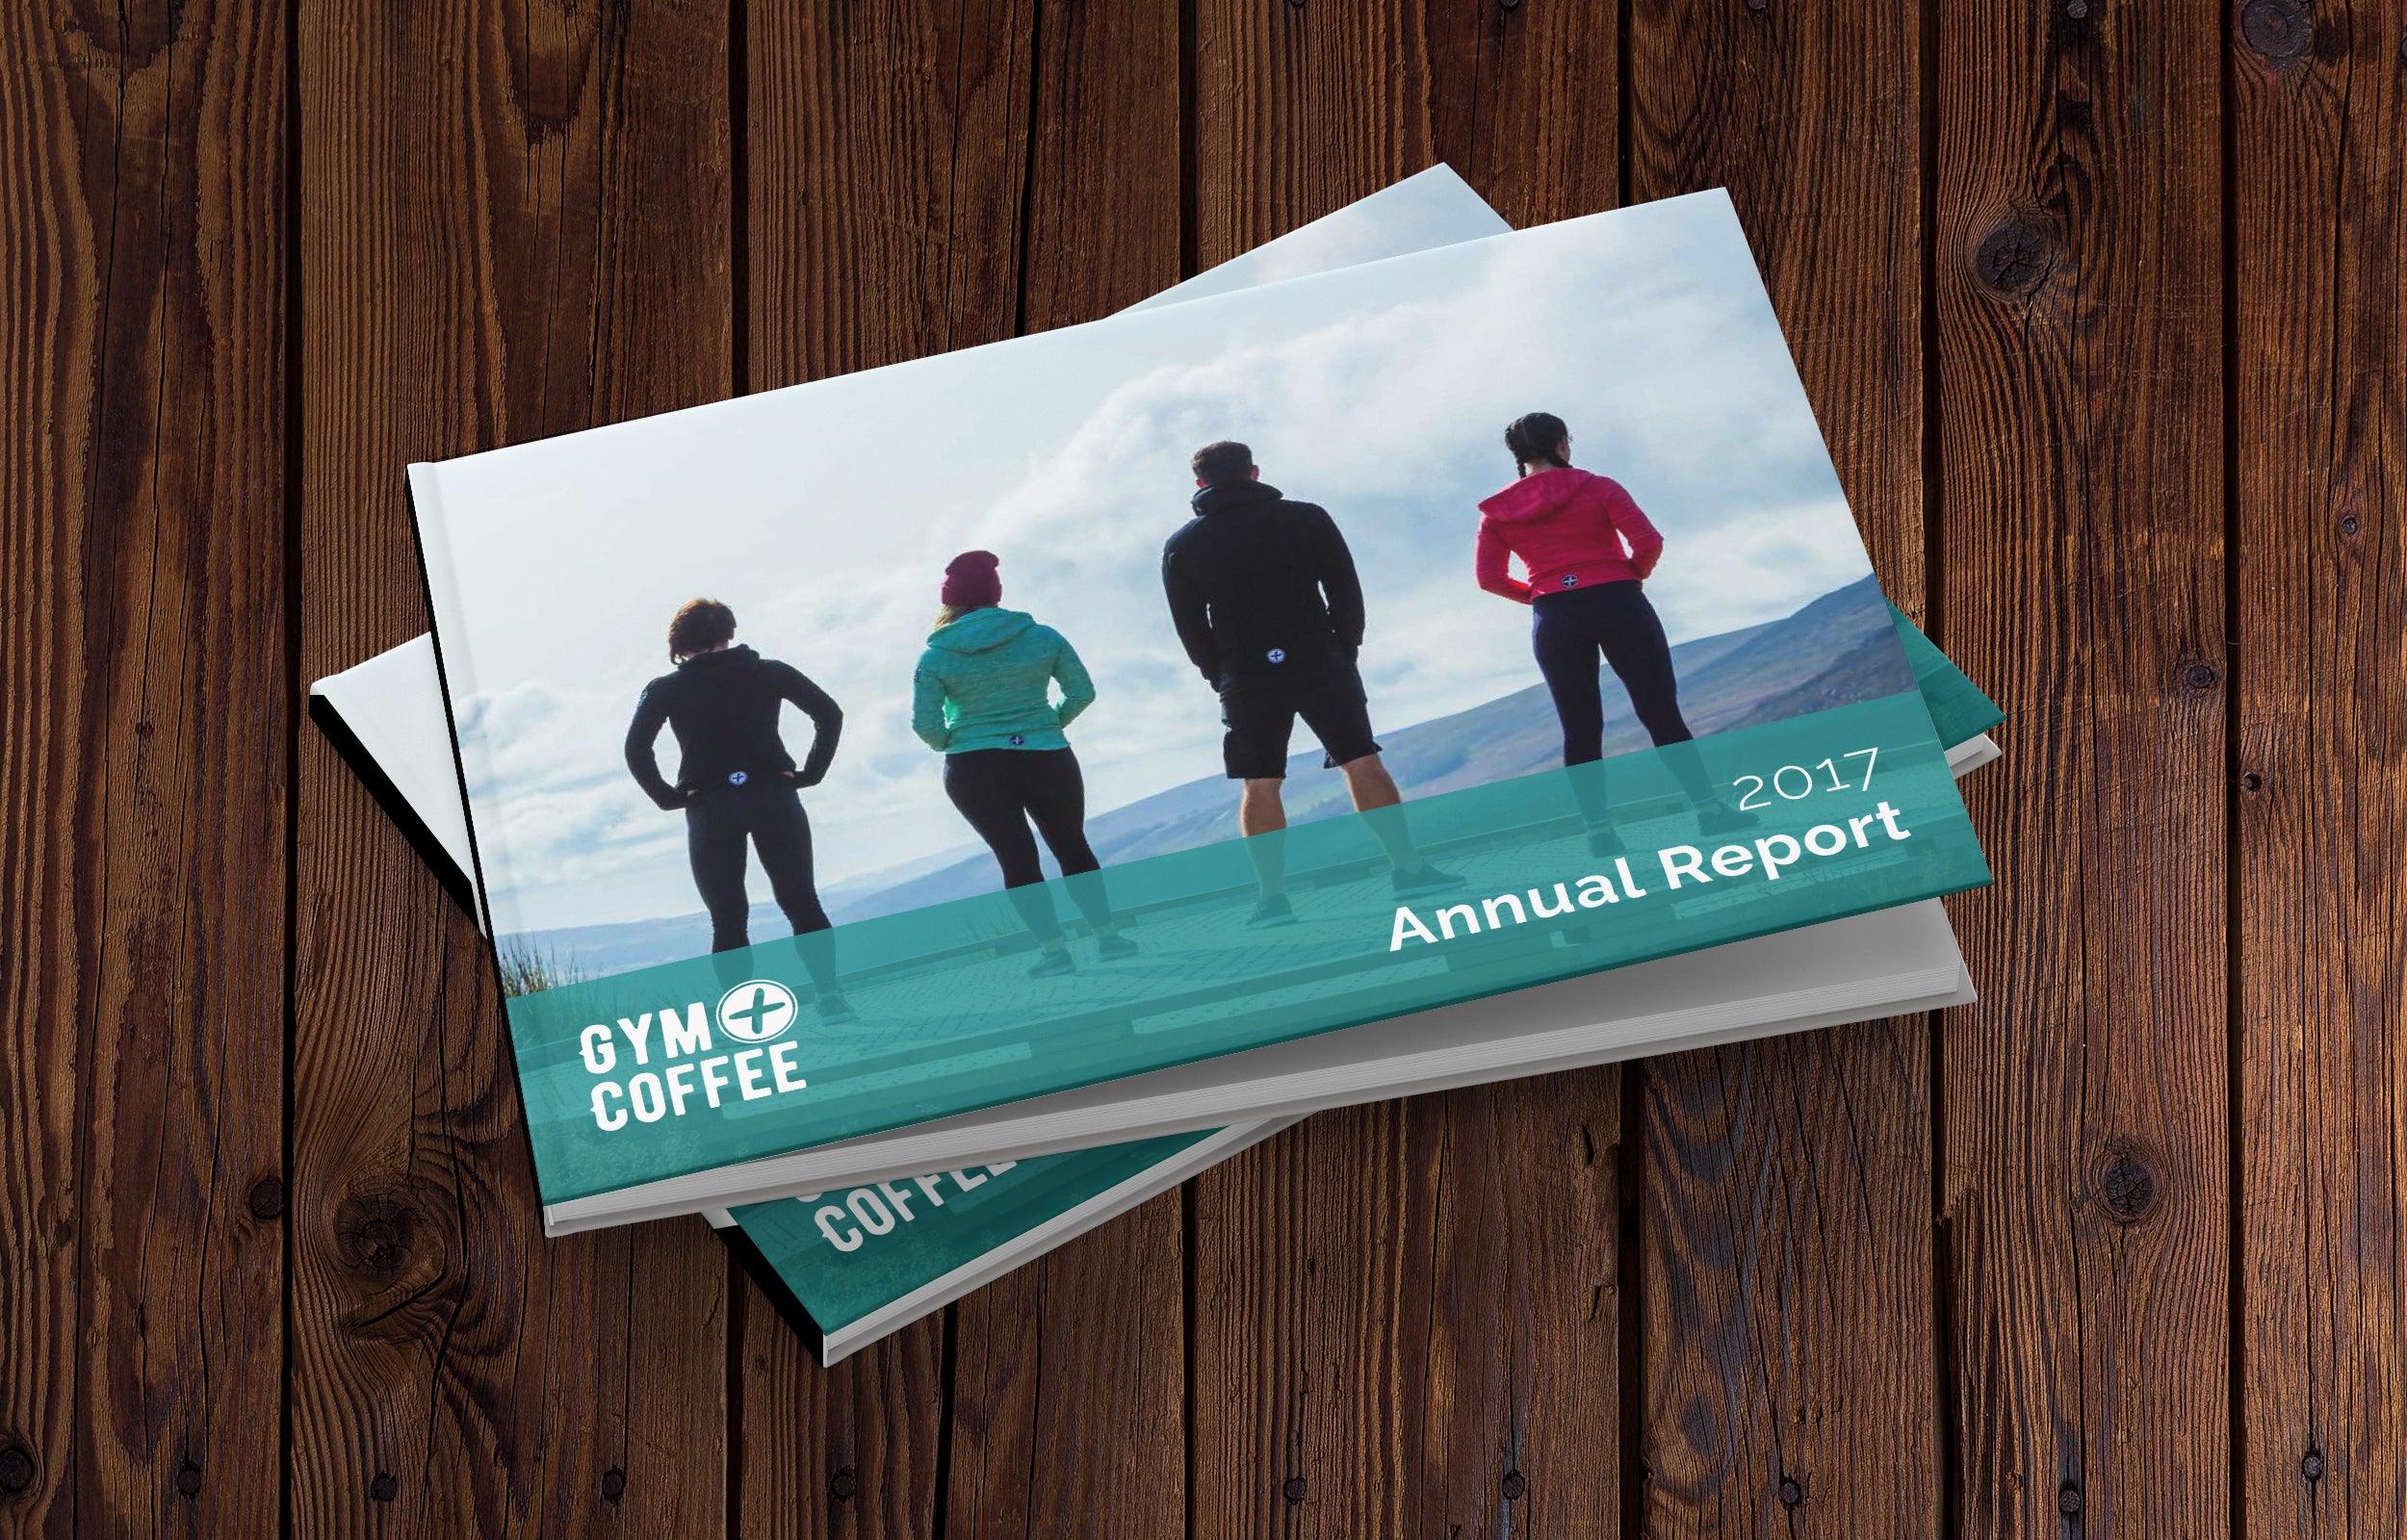 Chapter 18: First Annual Report | Gym+Coffee USA